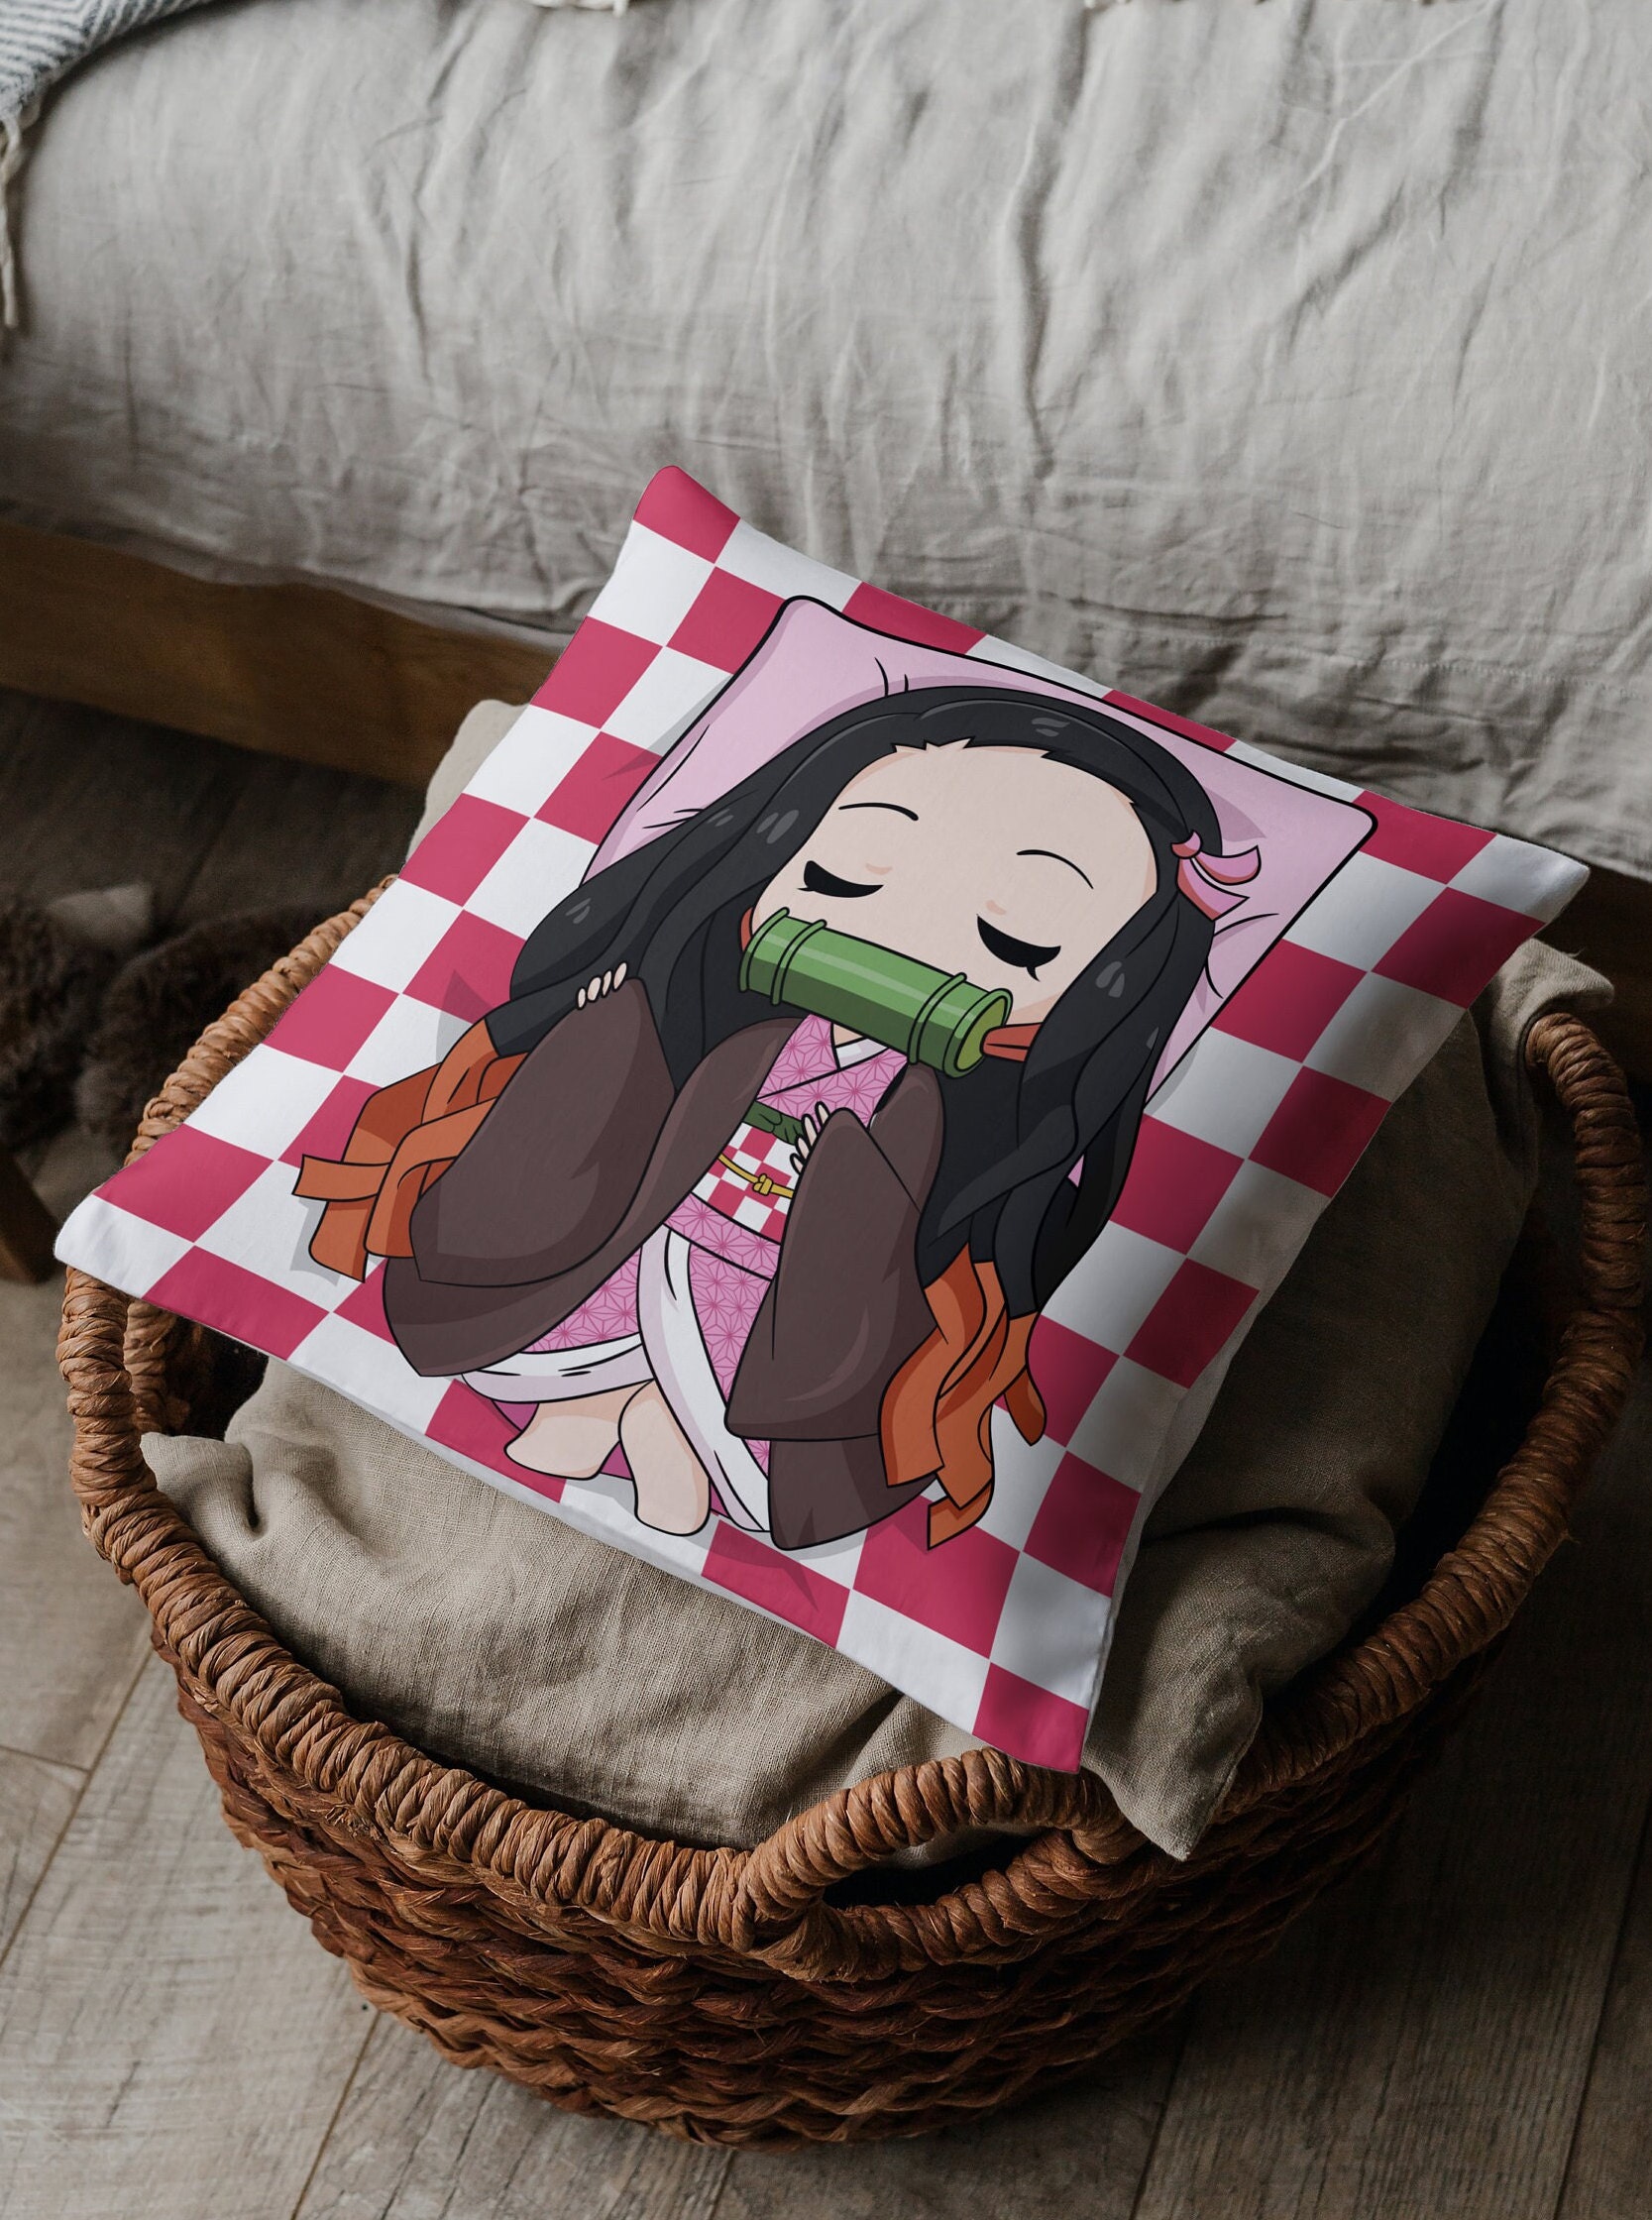 TOADDMOS Comfortable Light Coral Blanket Anime Learning Girl Print Leisure  School Home Nap Blanket for Camping Birthday Gift New